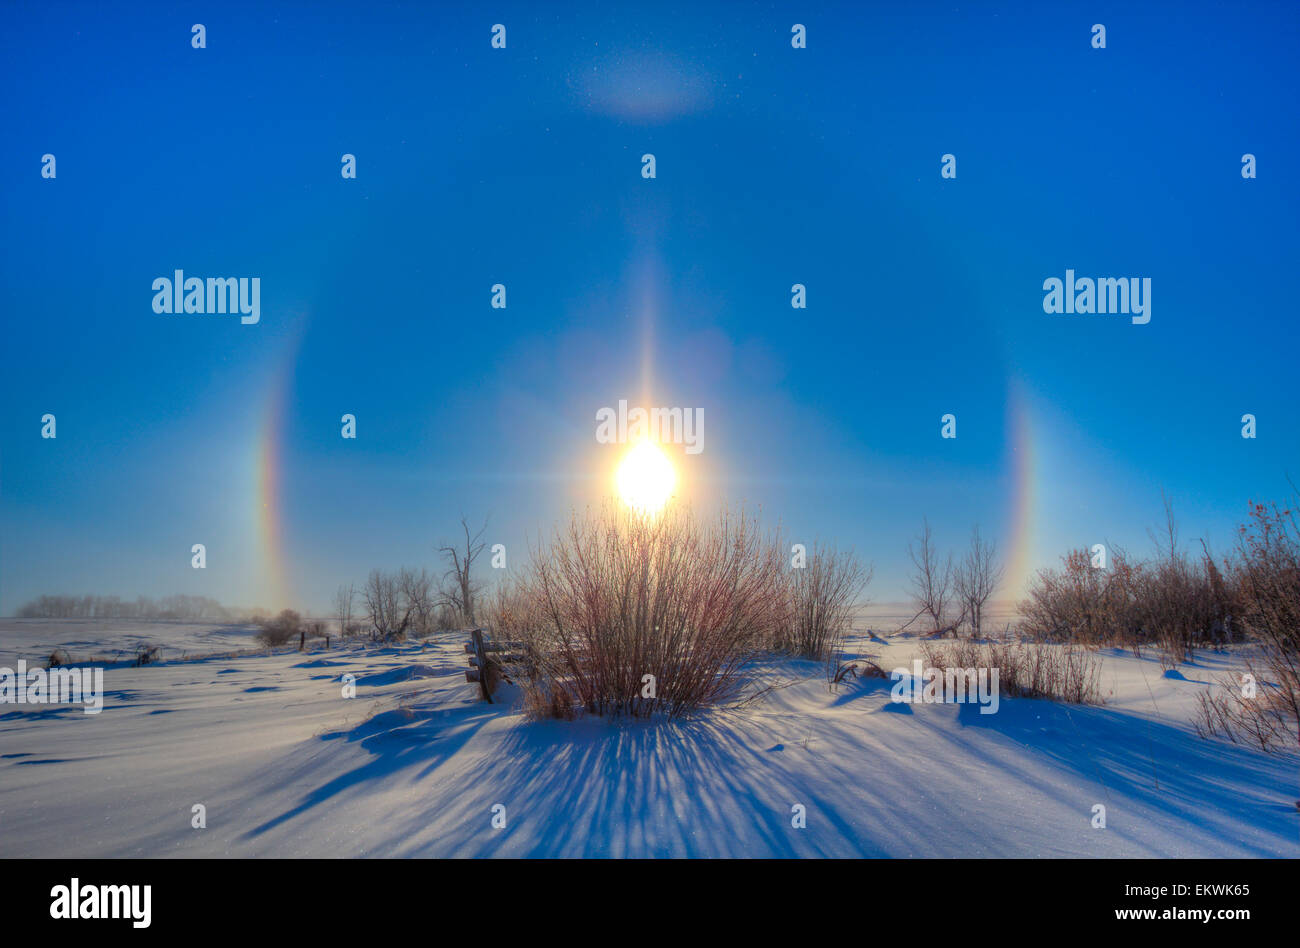 December 19, 2013 - High dynamic range photo of sundogs and a solar halo around the Sun in Alberta, Canada. The halo is caused b Stock Photo